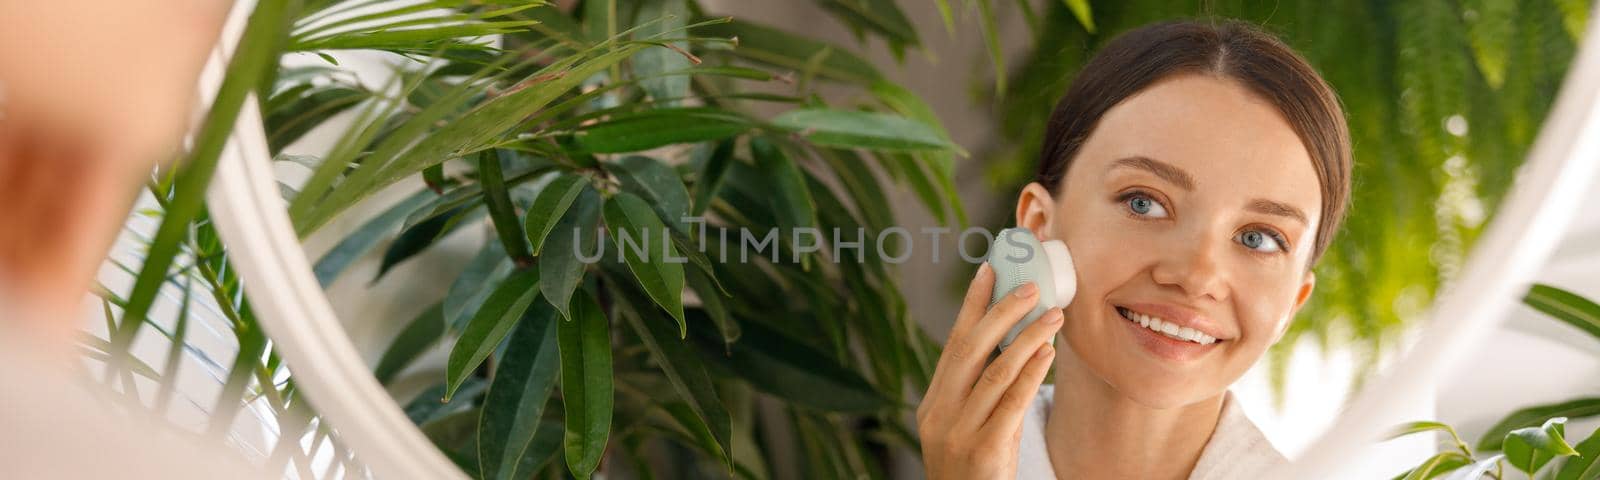 Portrait of young woman joyfully looking at herself in the mirror while cleansing her skin using silicone face brush in the bathroom decorated with green plants by Yaroslav_astakhov